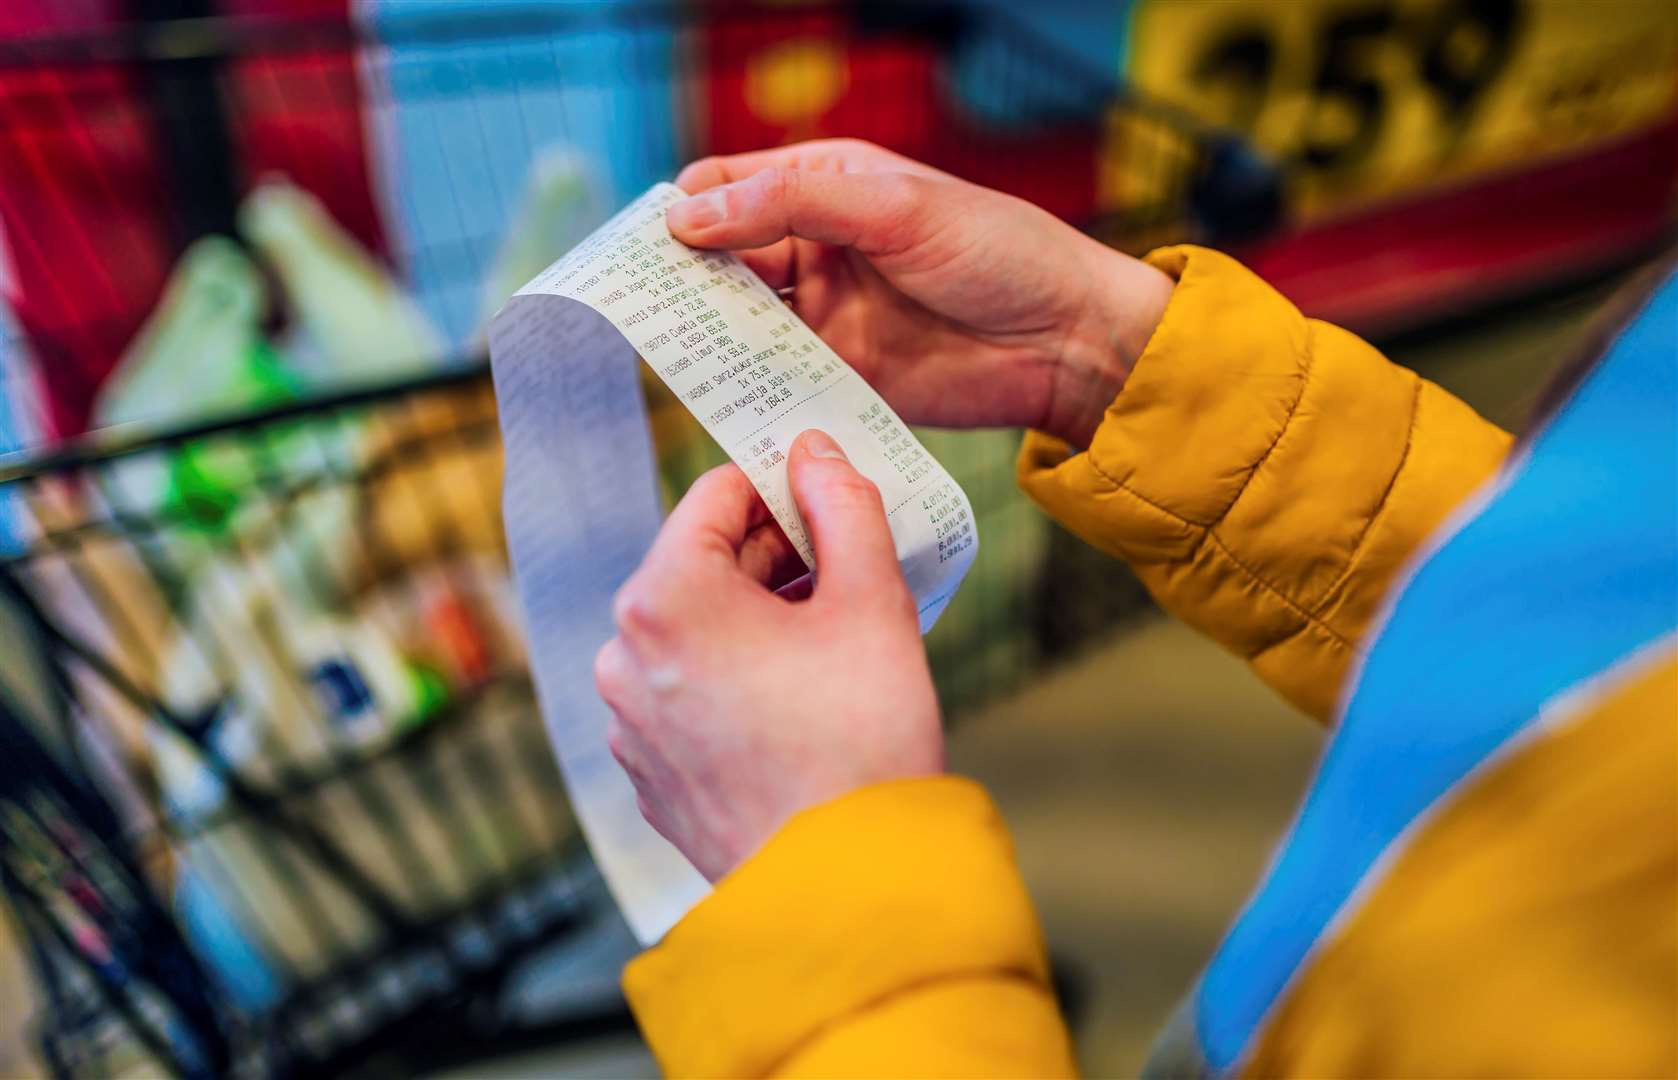 Receipt checks at self-checkouts are increasingly common. Image: iStock.